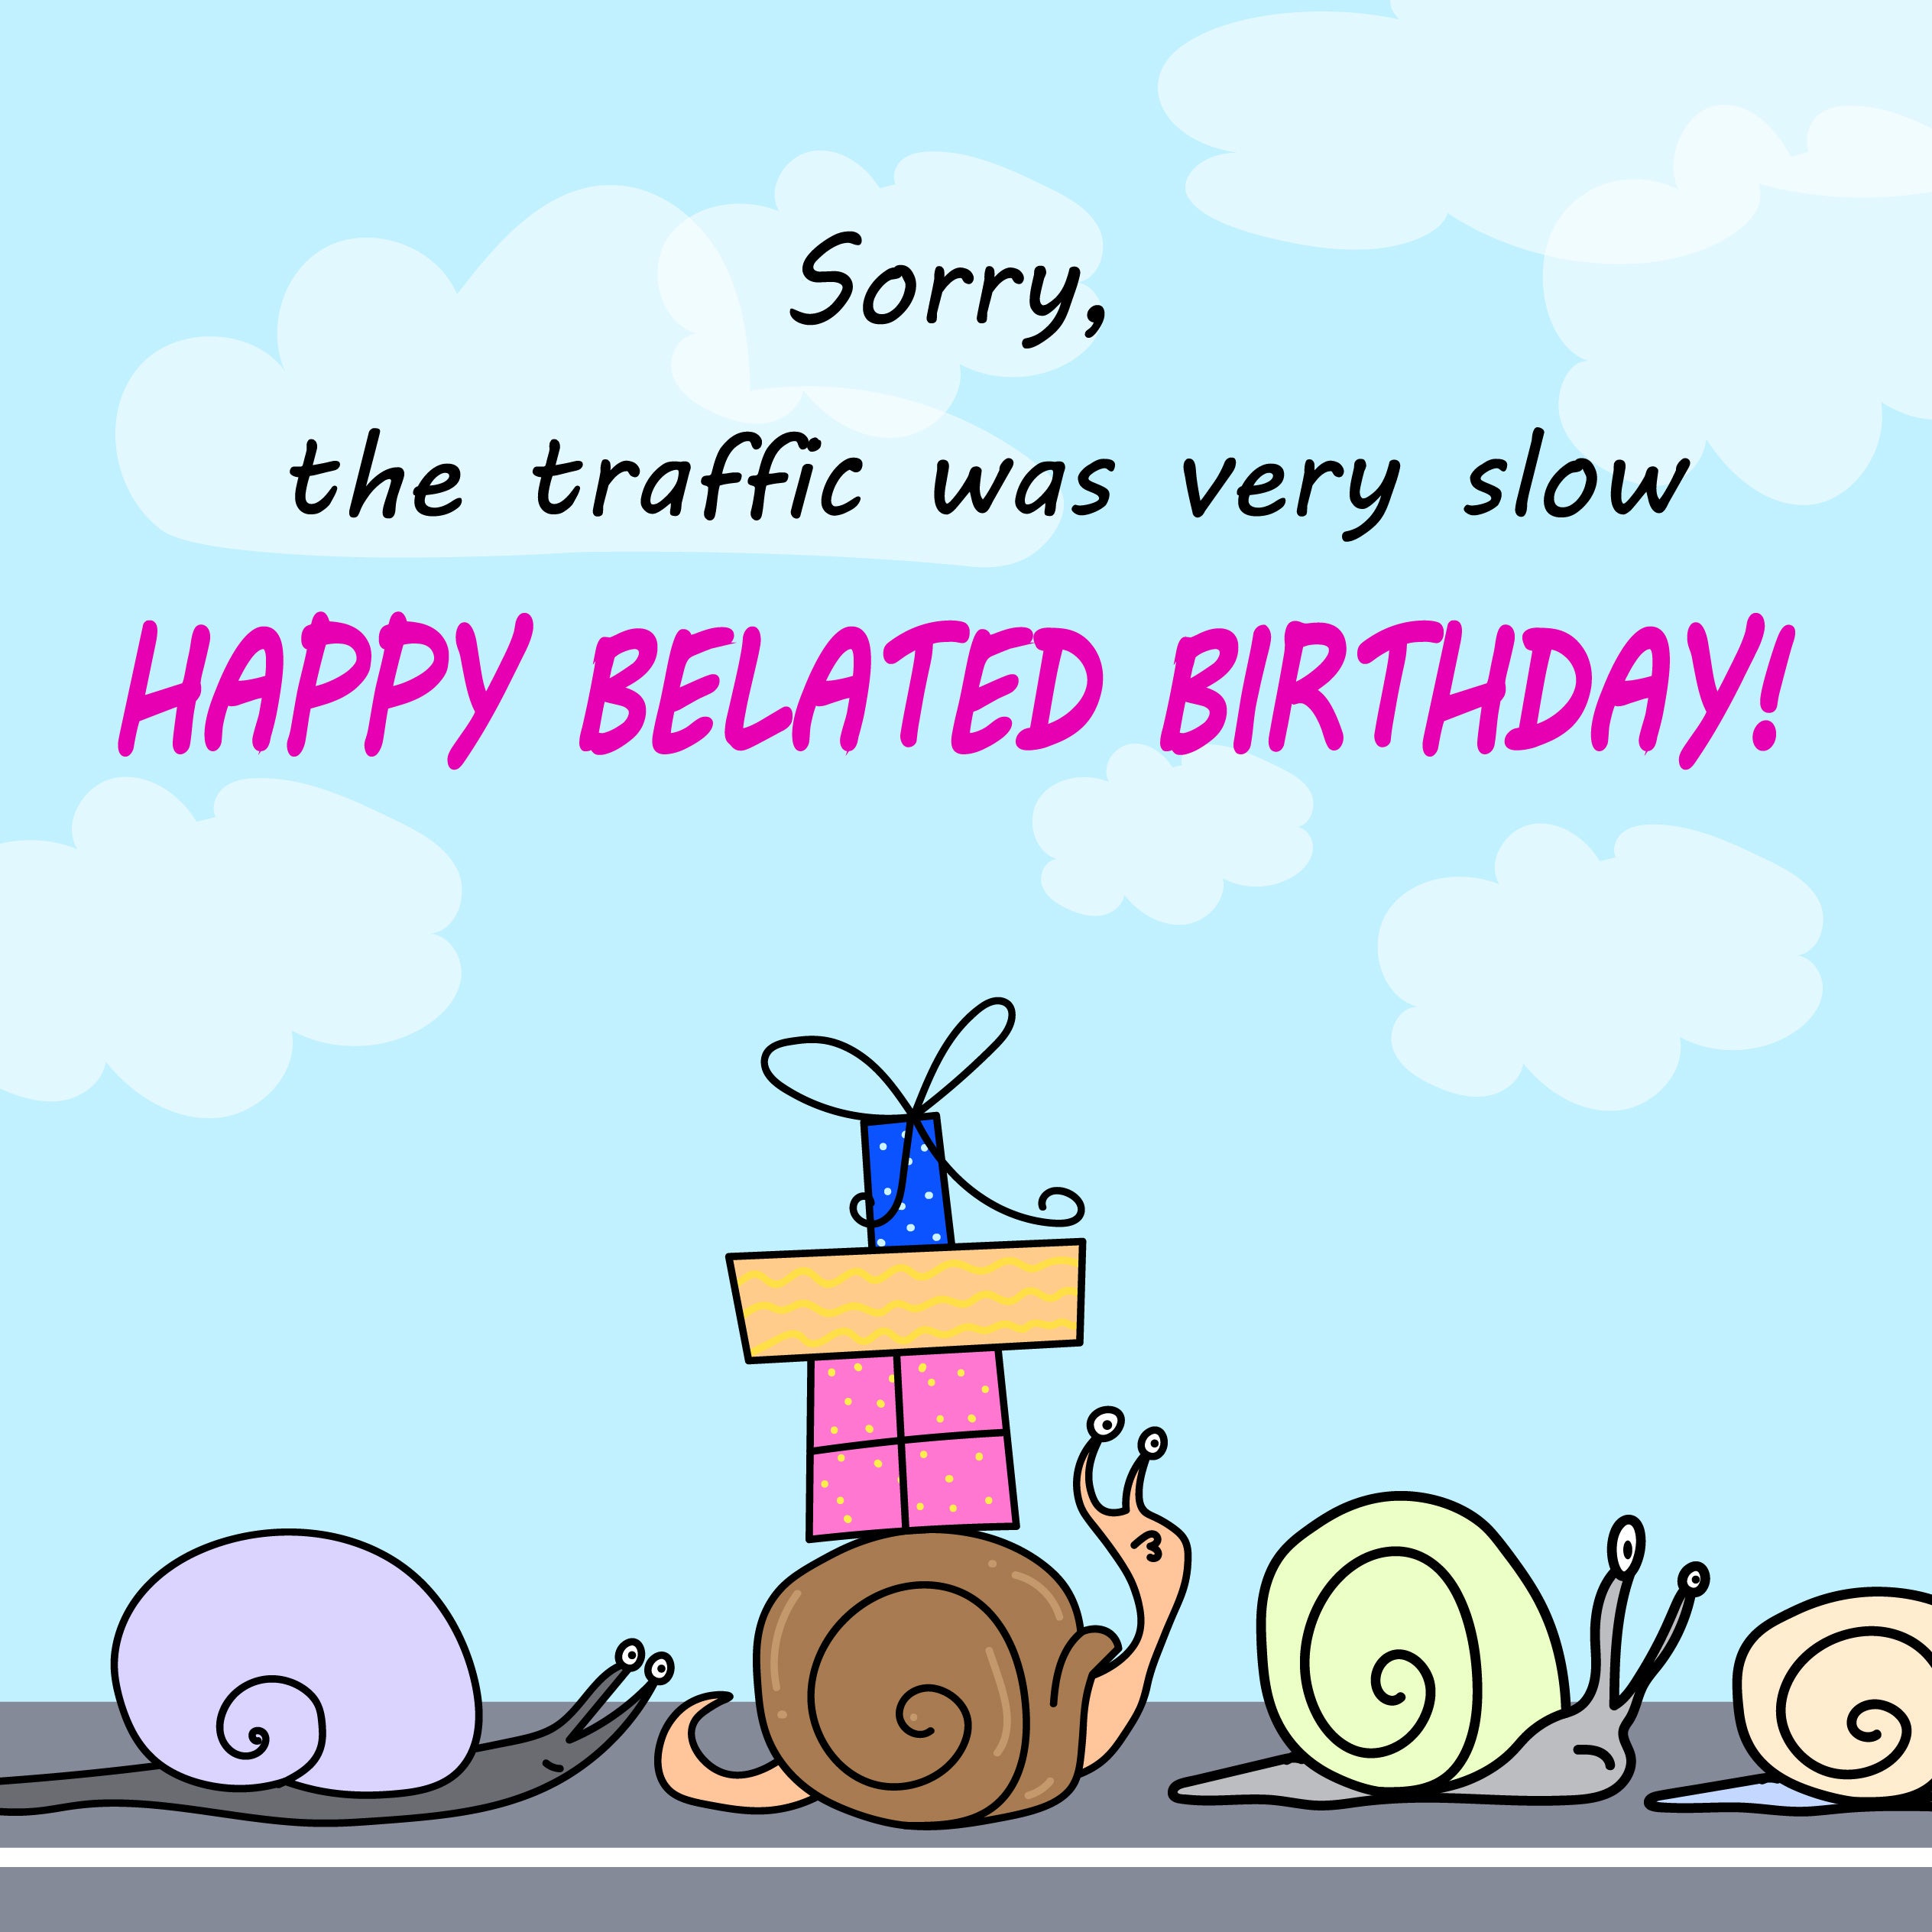 Happy Belated Birthday The Traffic Was Very Slow | Boomf